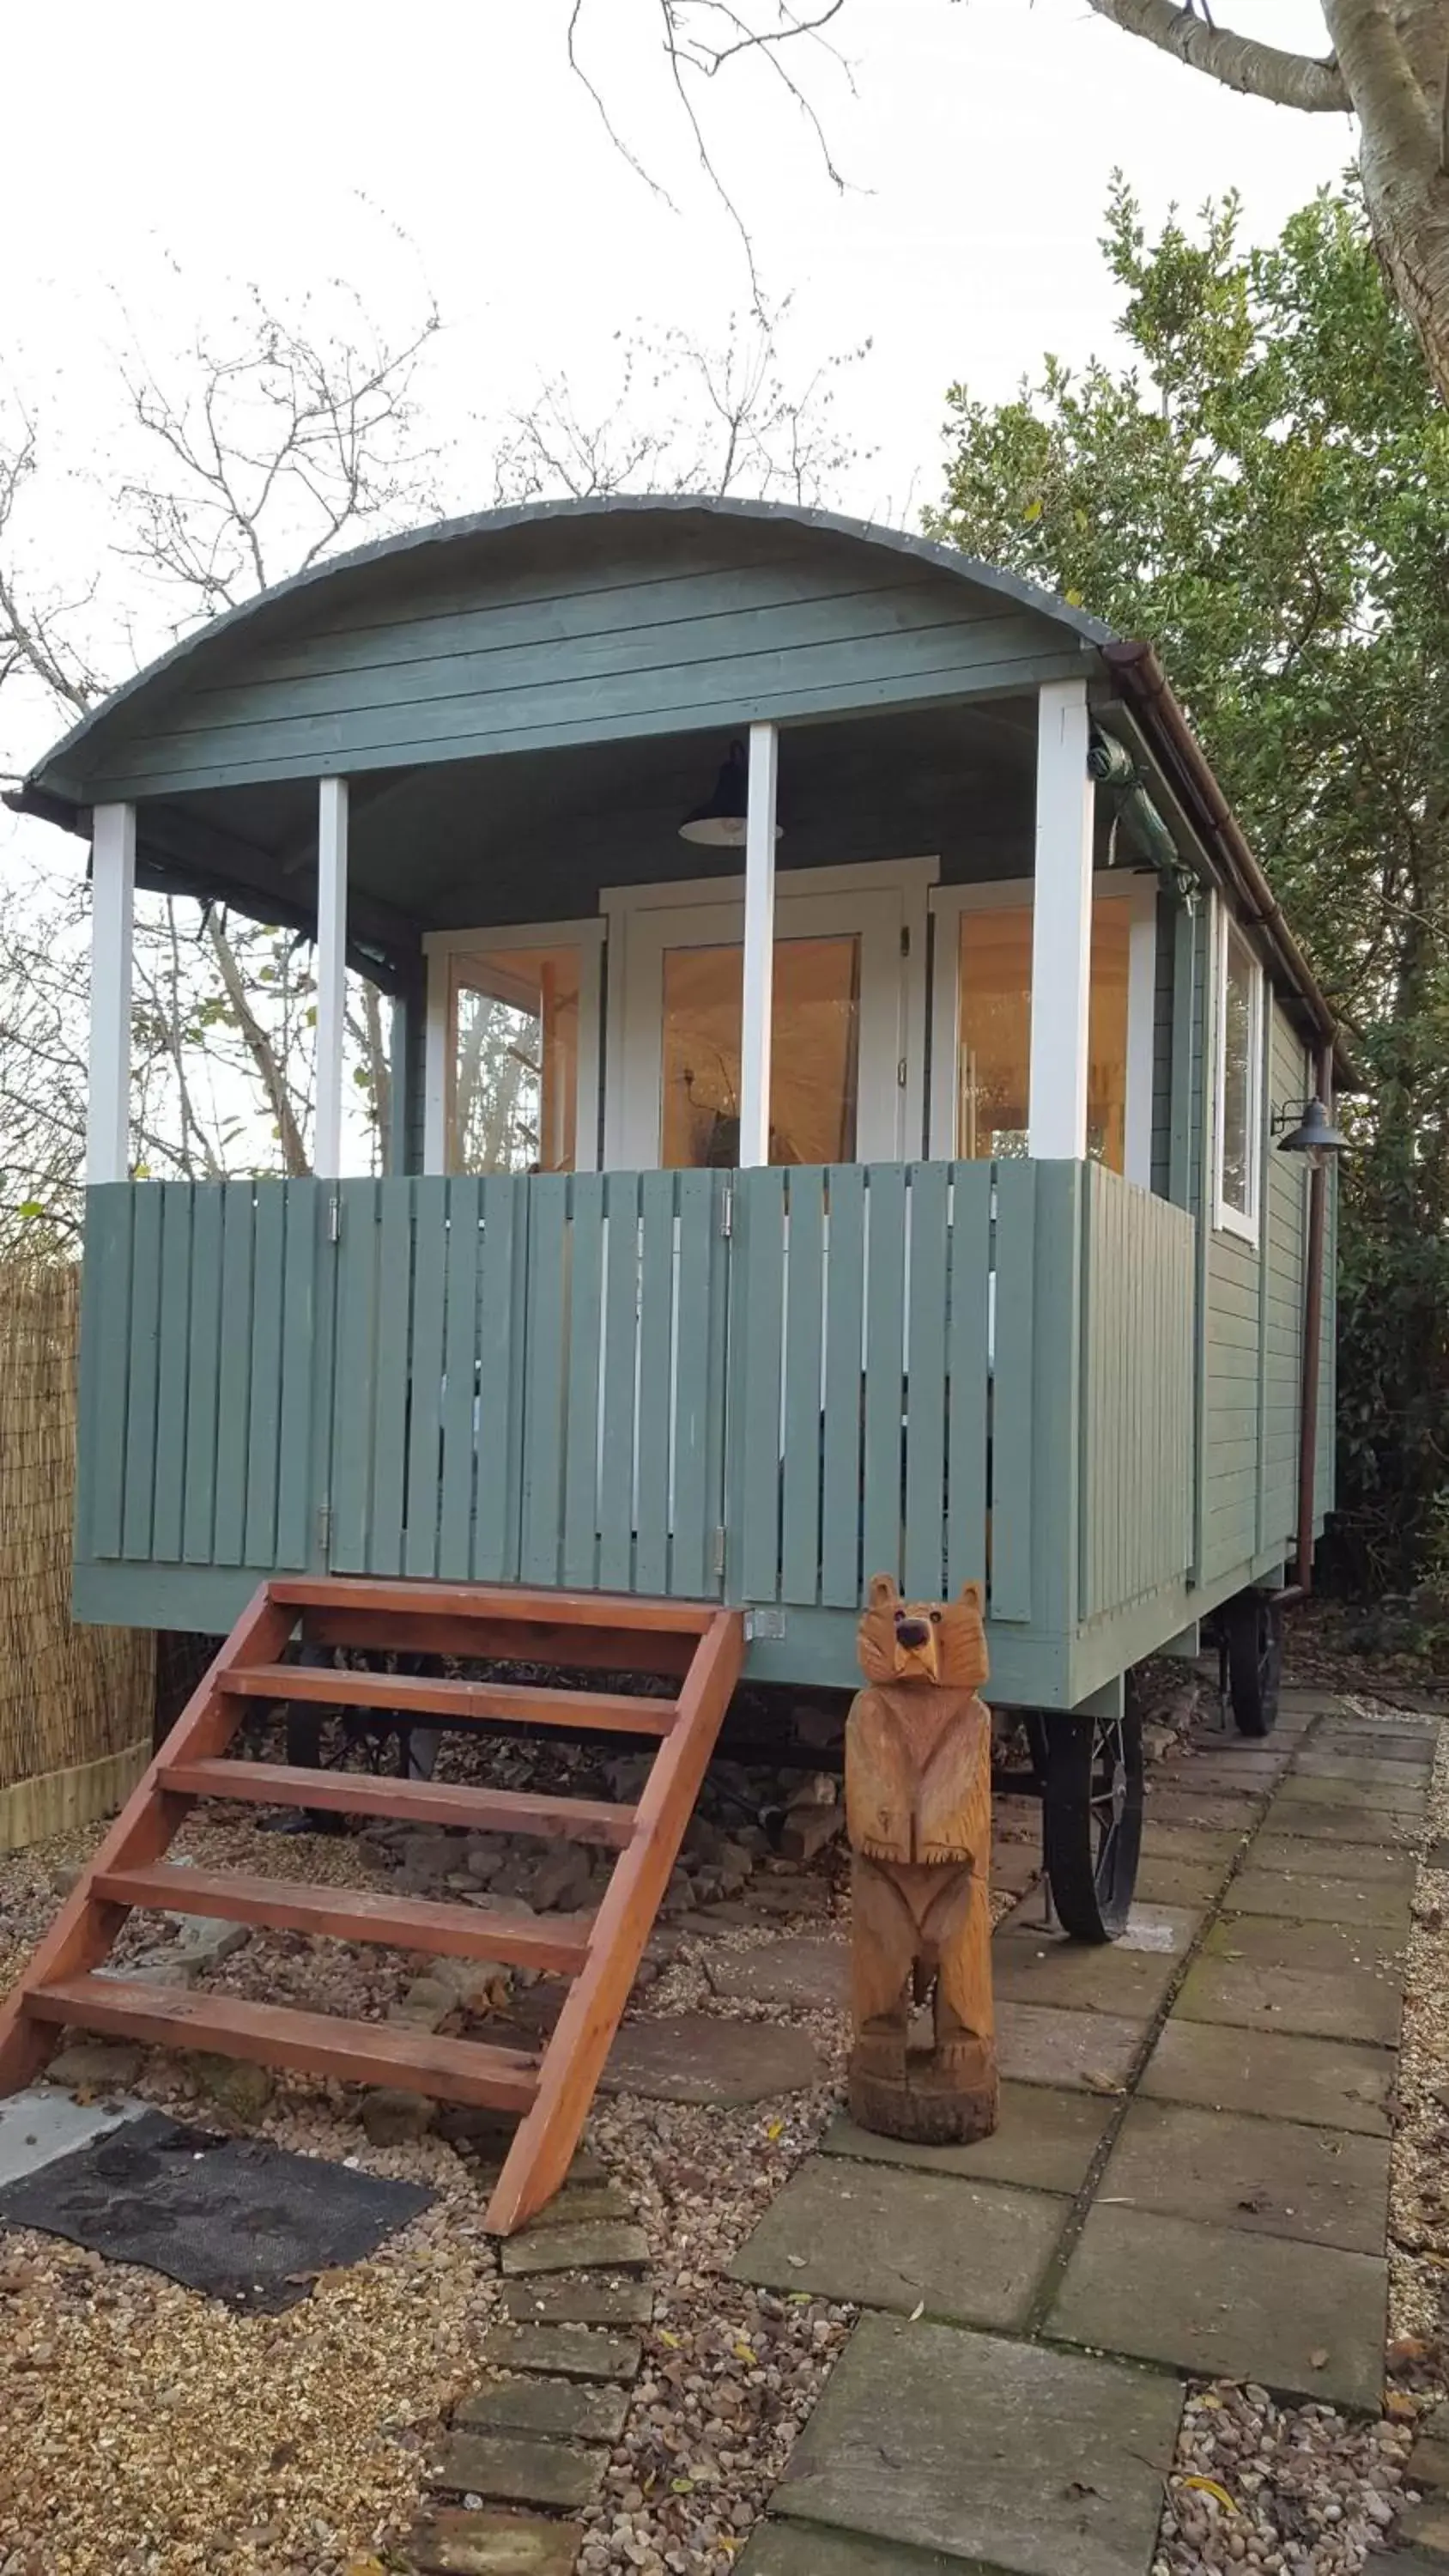 Property building in Little England Retreats - Cottage, Yurt and Shepherd Huts